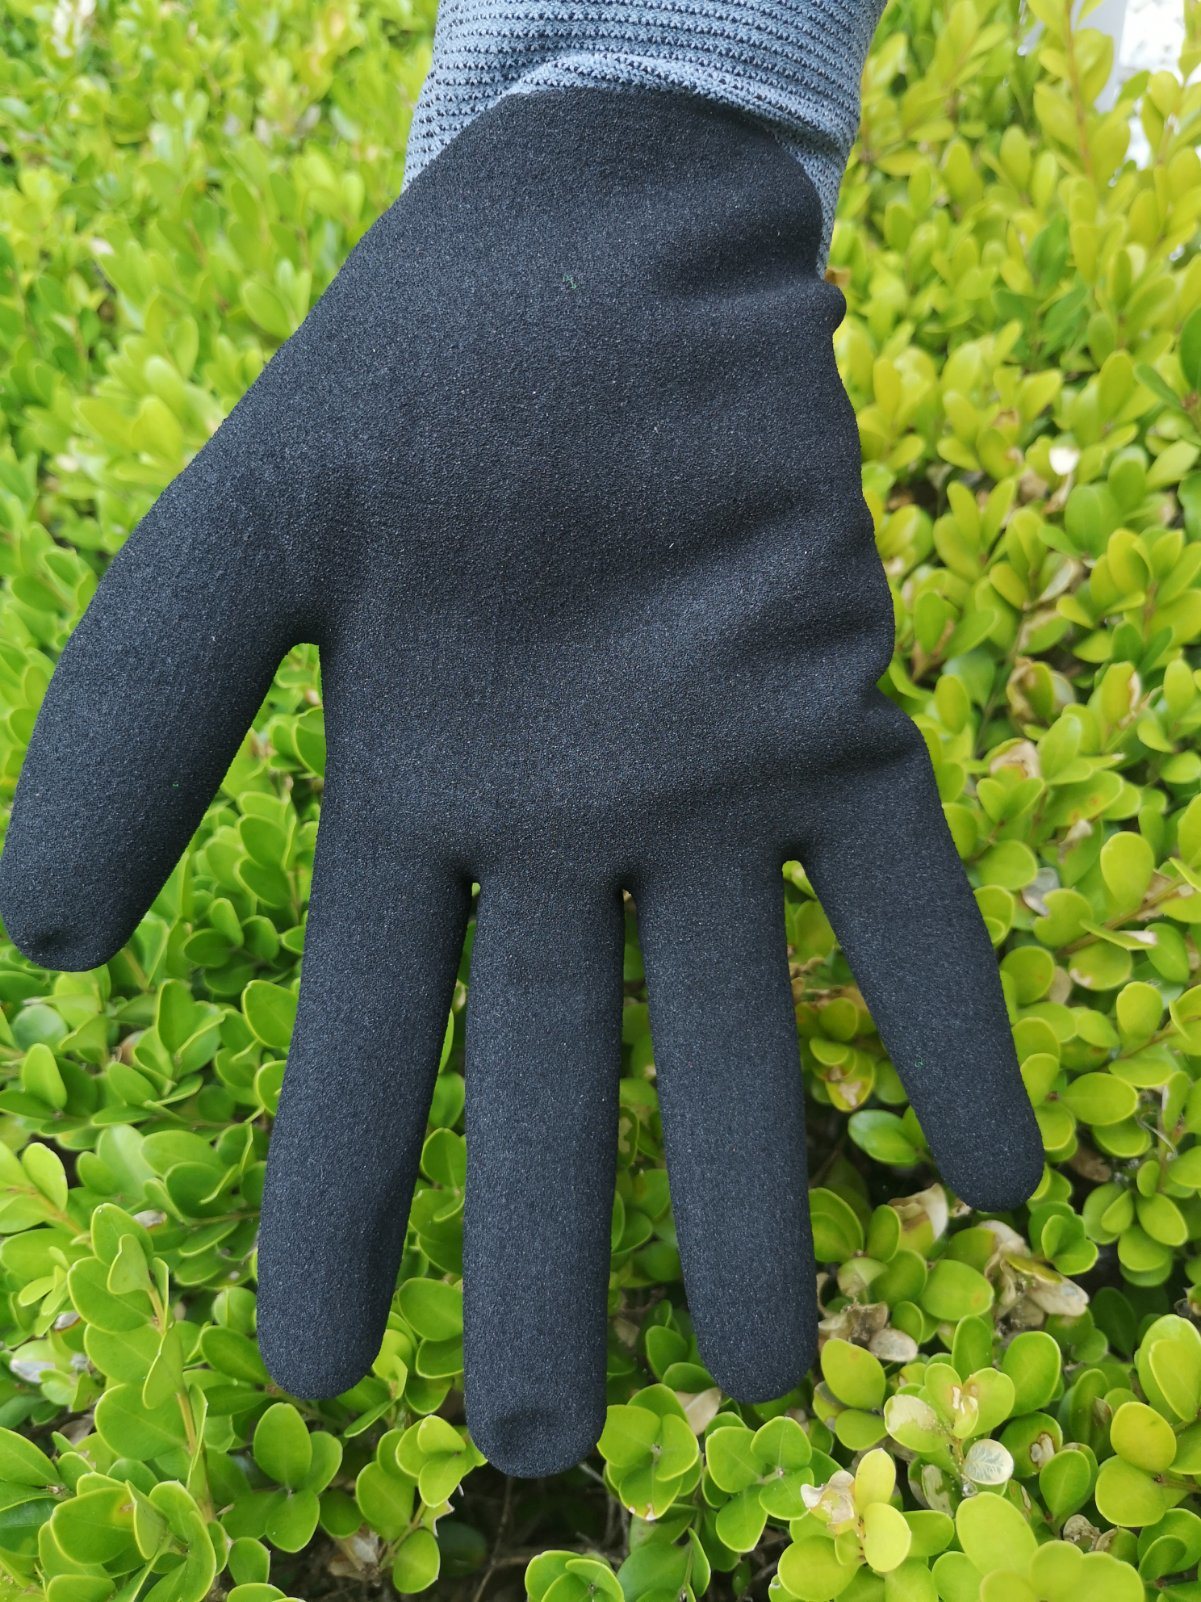  Hand Warm Knitted Liner Gloves With Good Dexterity For Work